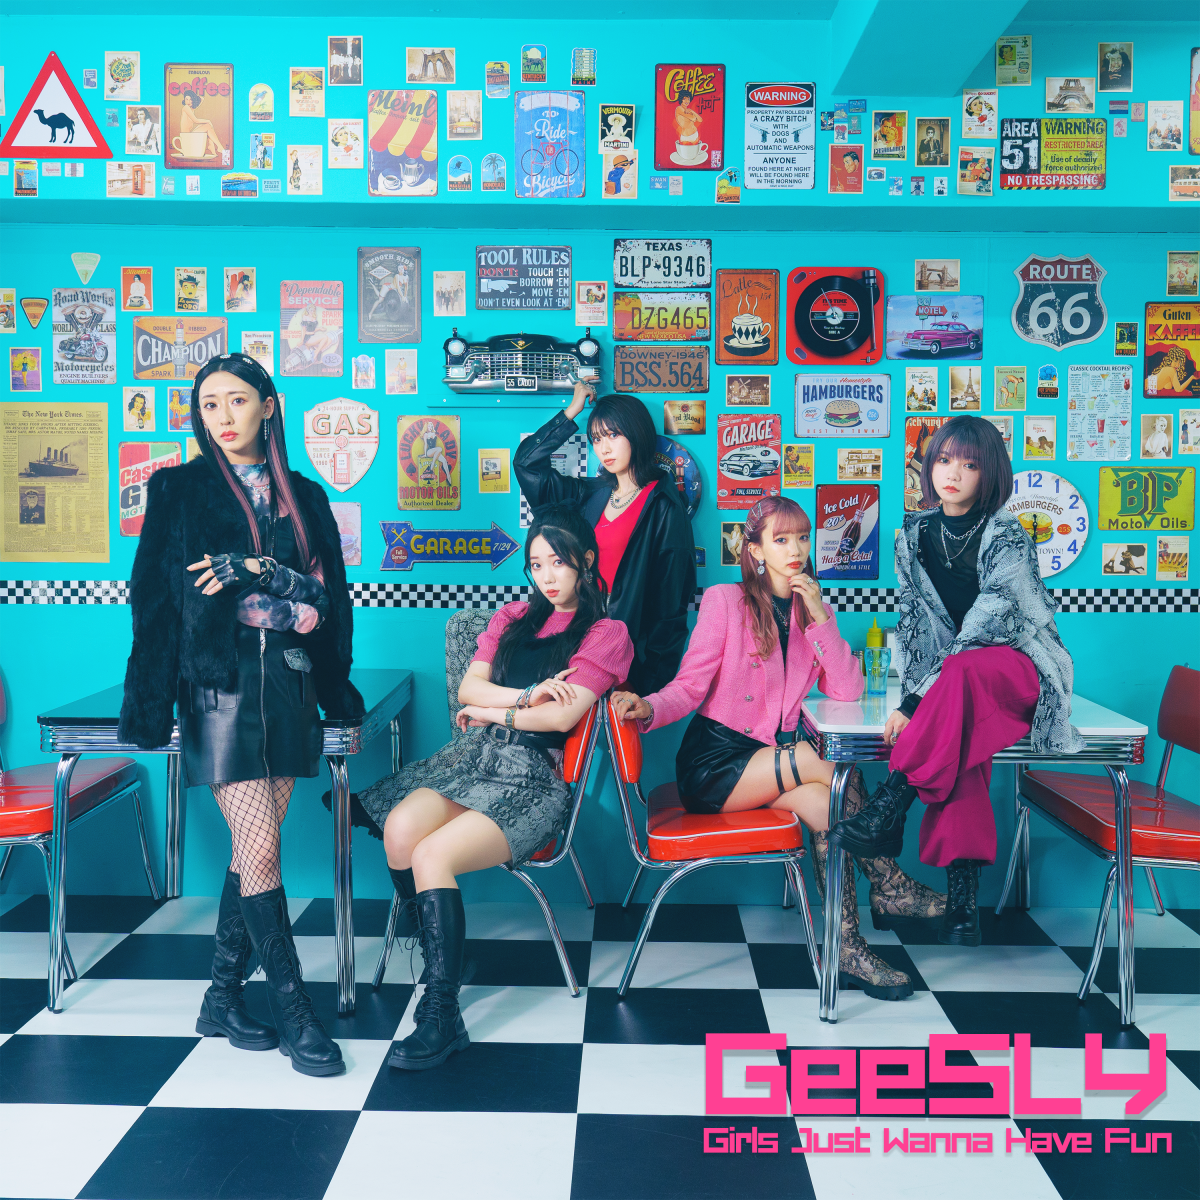 GeeSLY【10/8-10期間限定特典：A4クリアファイル】11/1(火)発売 GeeSLY「Girls Just Wanna Have Fun」(ULTRS-9)×2